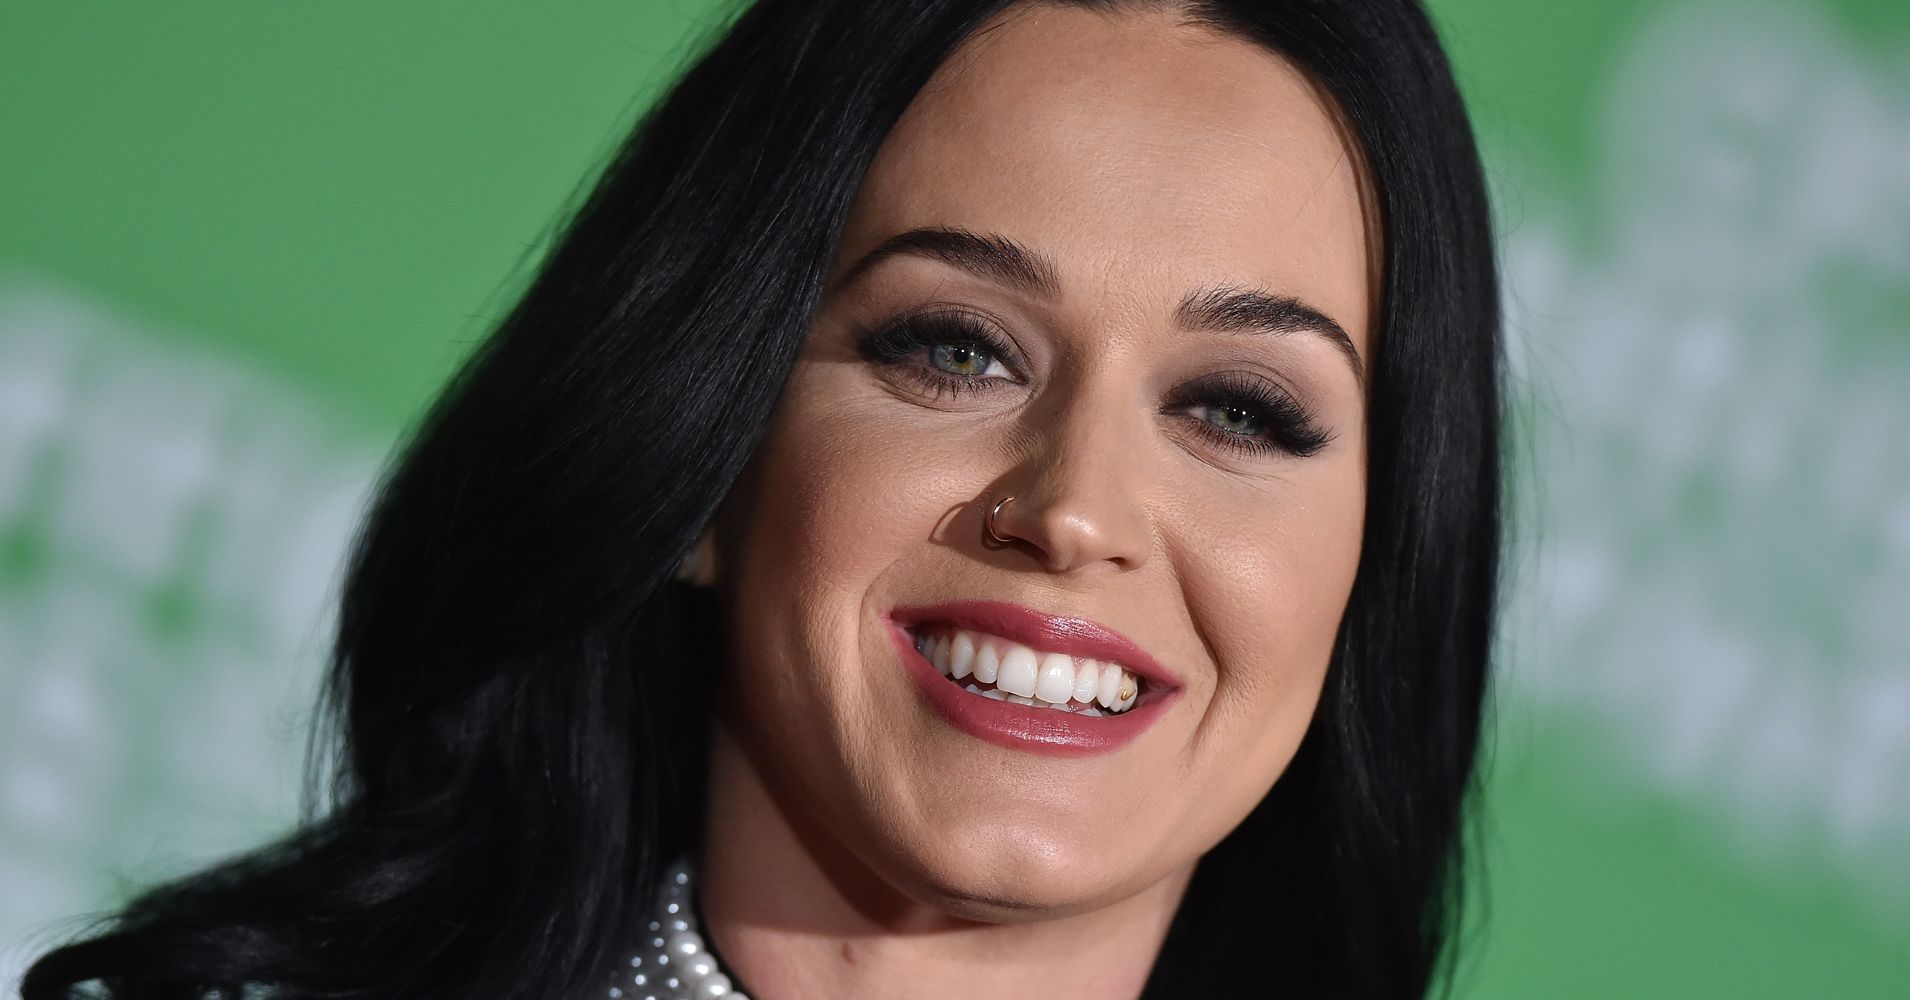 We Need To Talk About The Katy Perry PSA | HuffPost